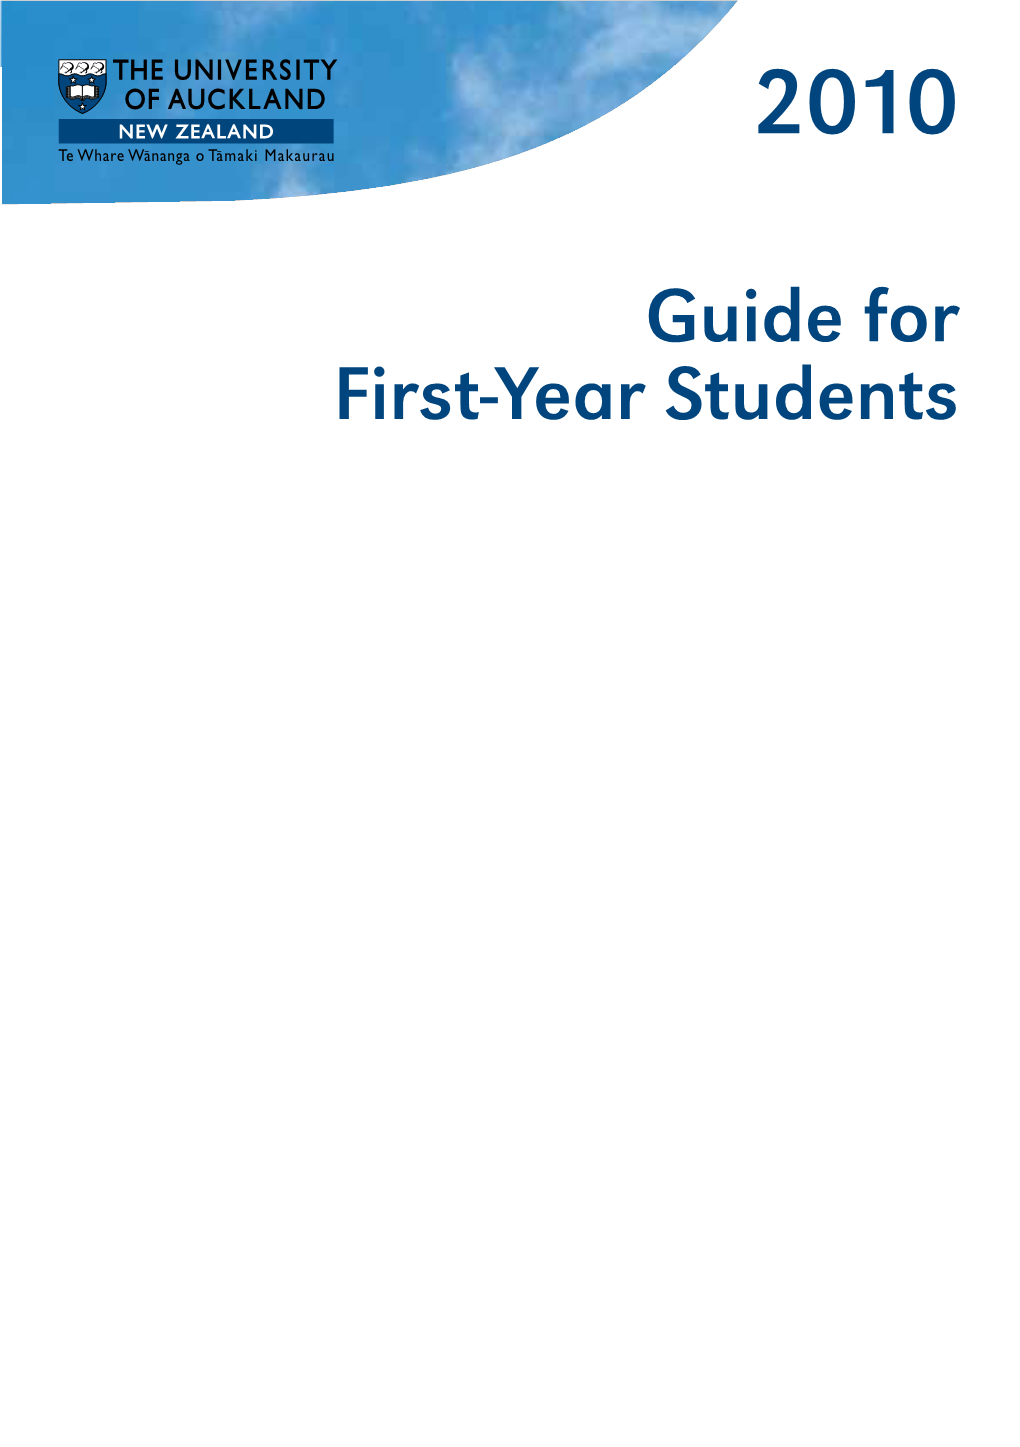 Guide for First-Year Students 2010